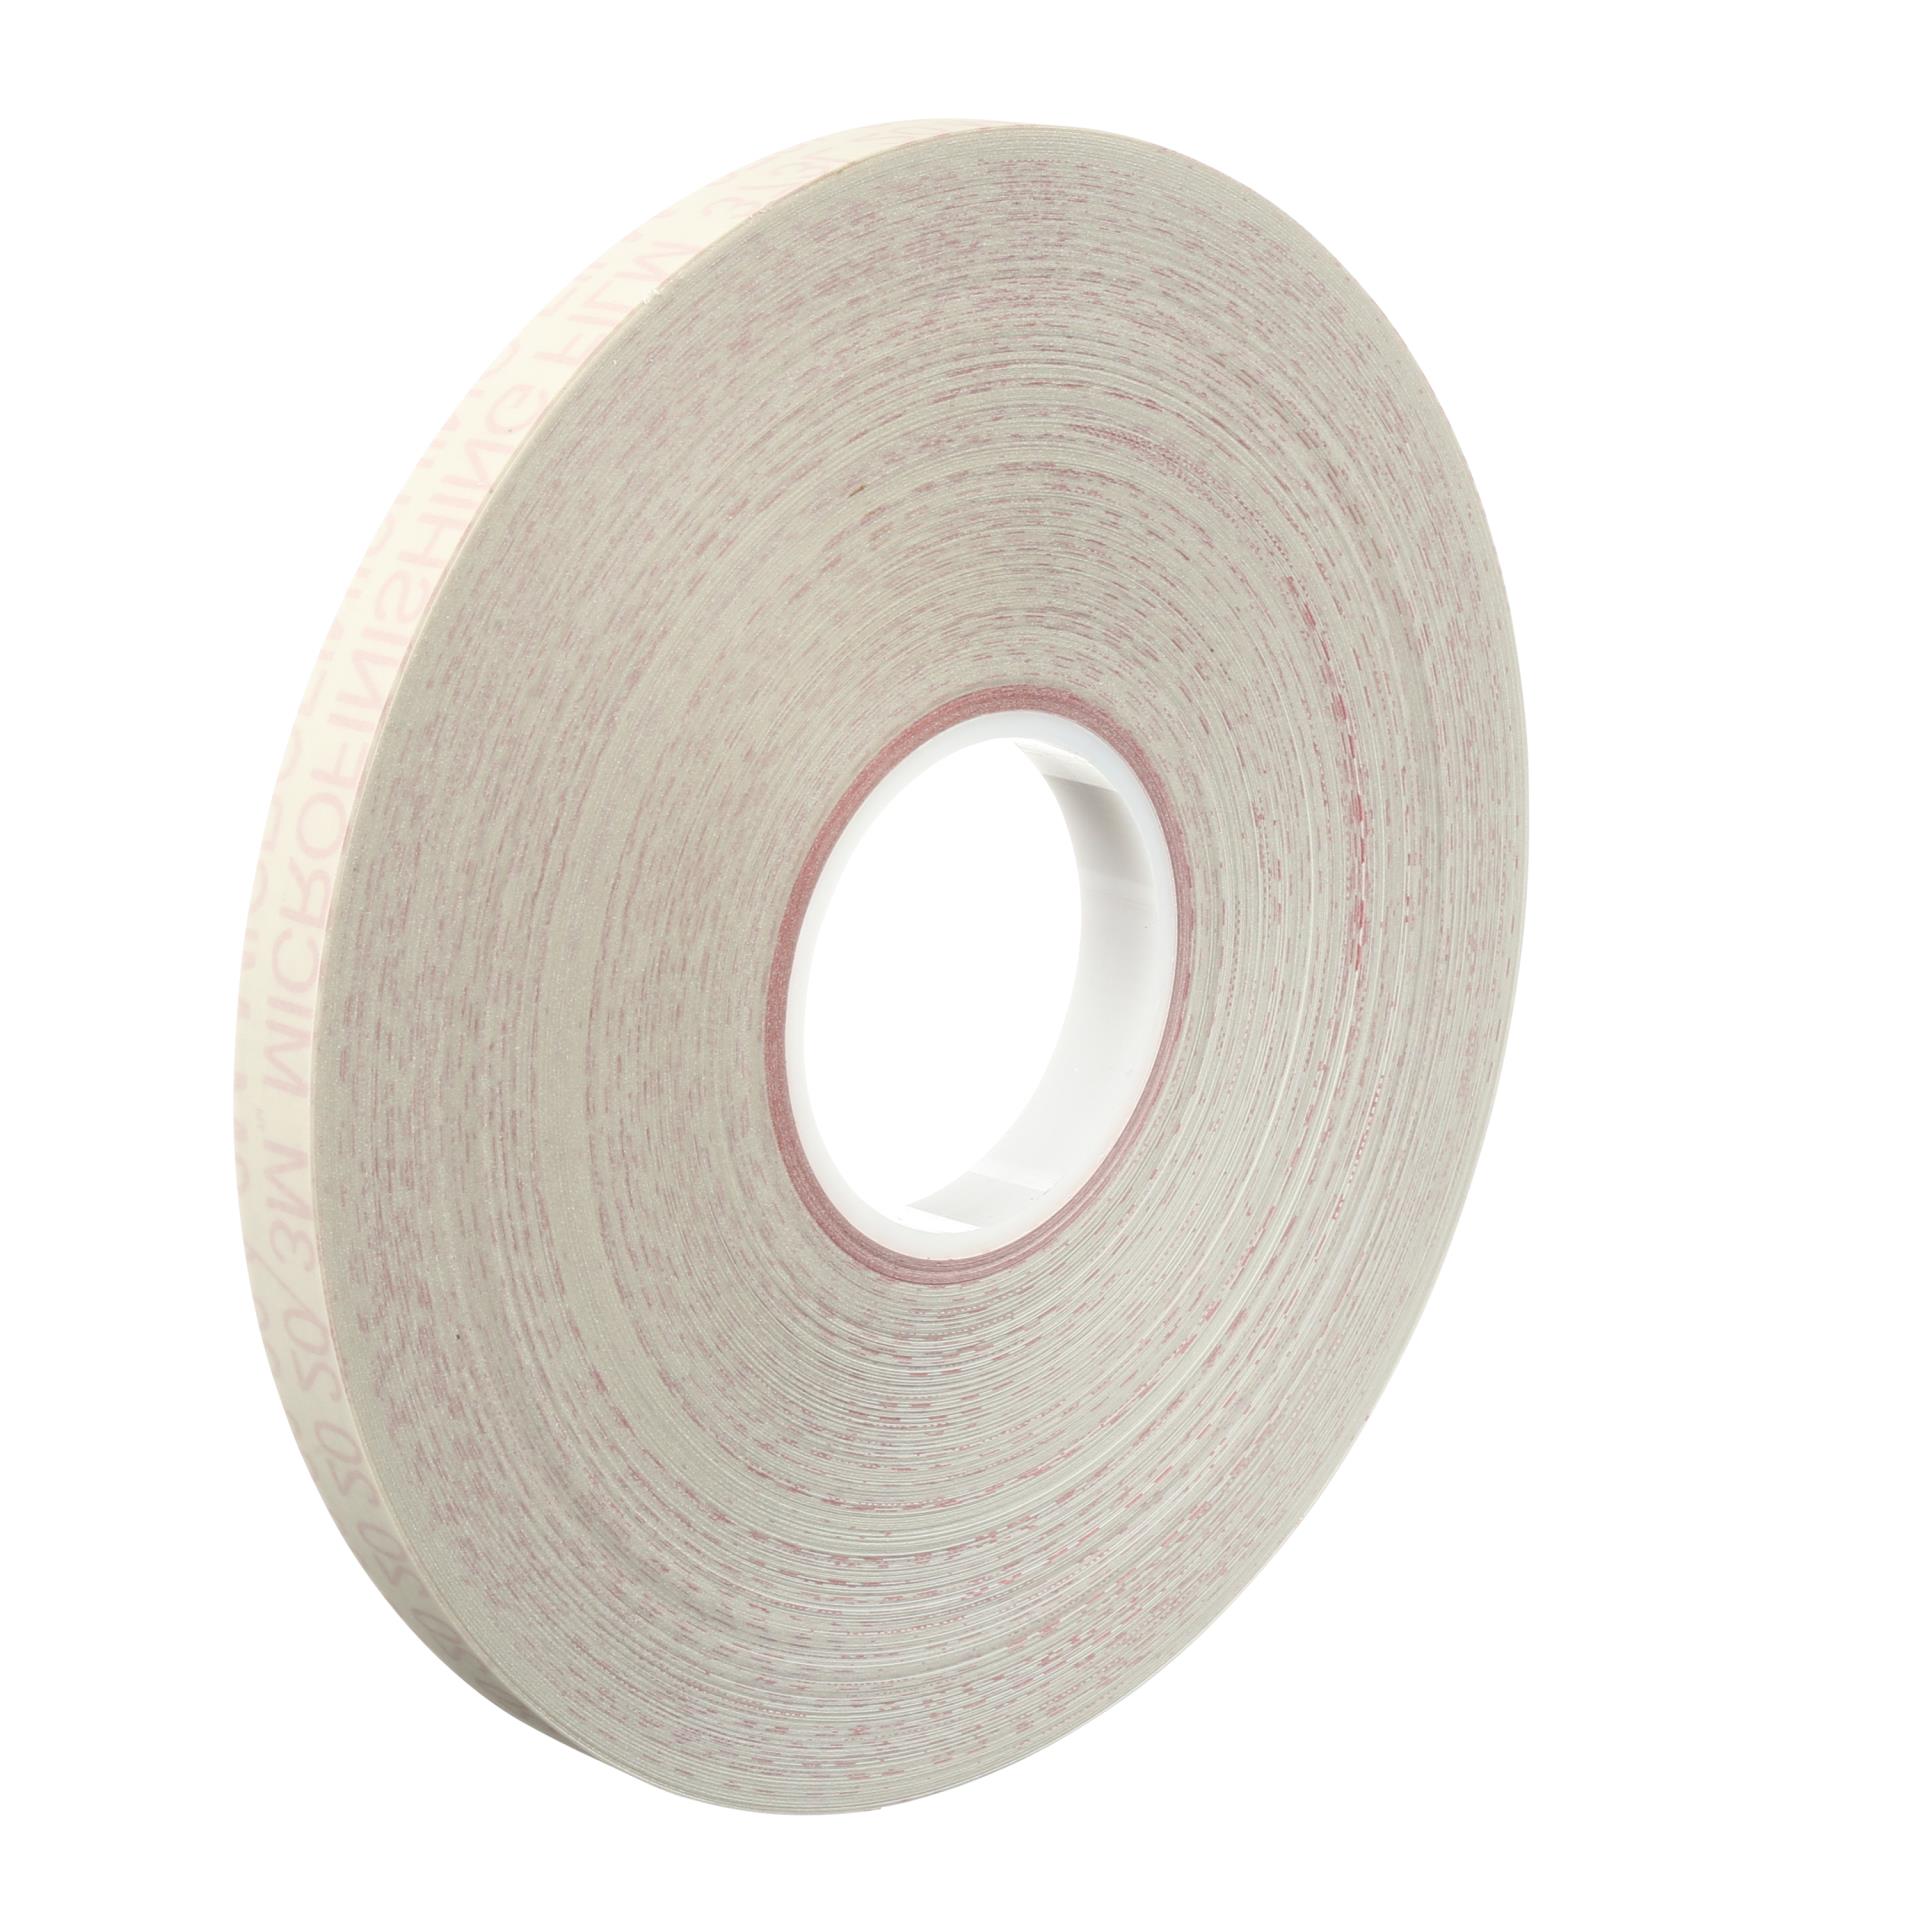 SPECIAL OFFER 2 OPEN CELL FOAM STRIPS  1.5mm AND 2mm  200mm X 40mm 